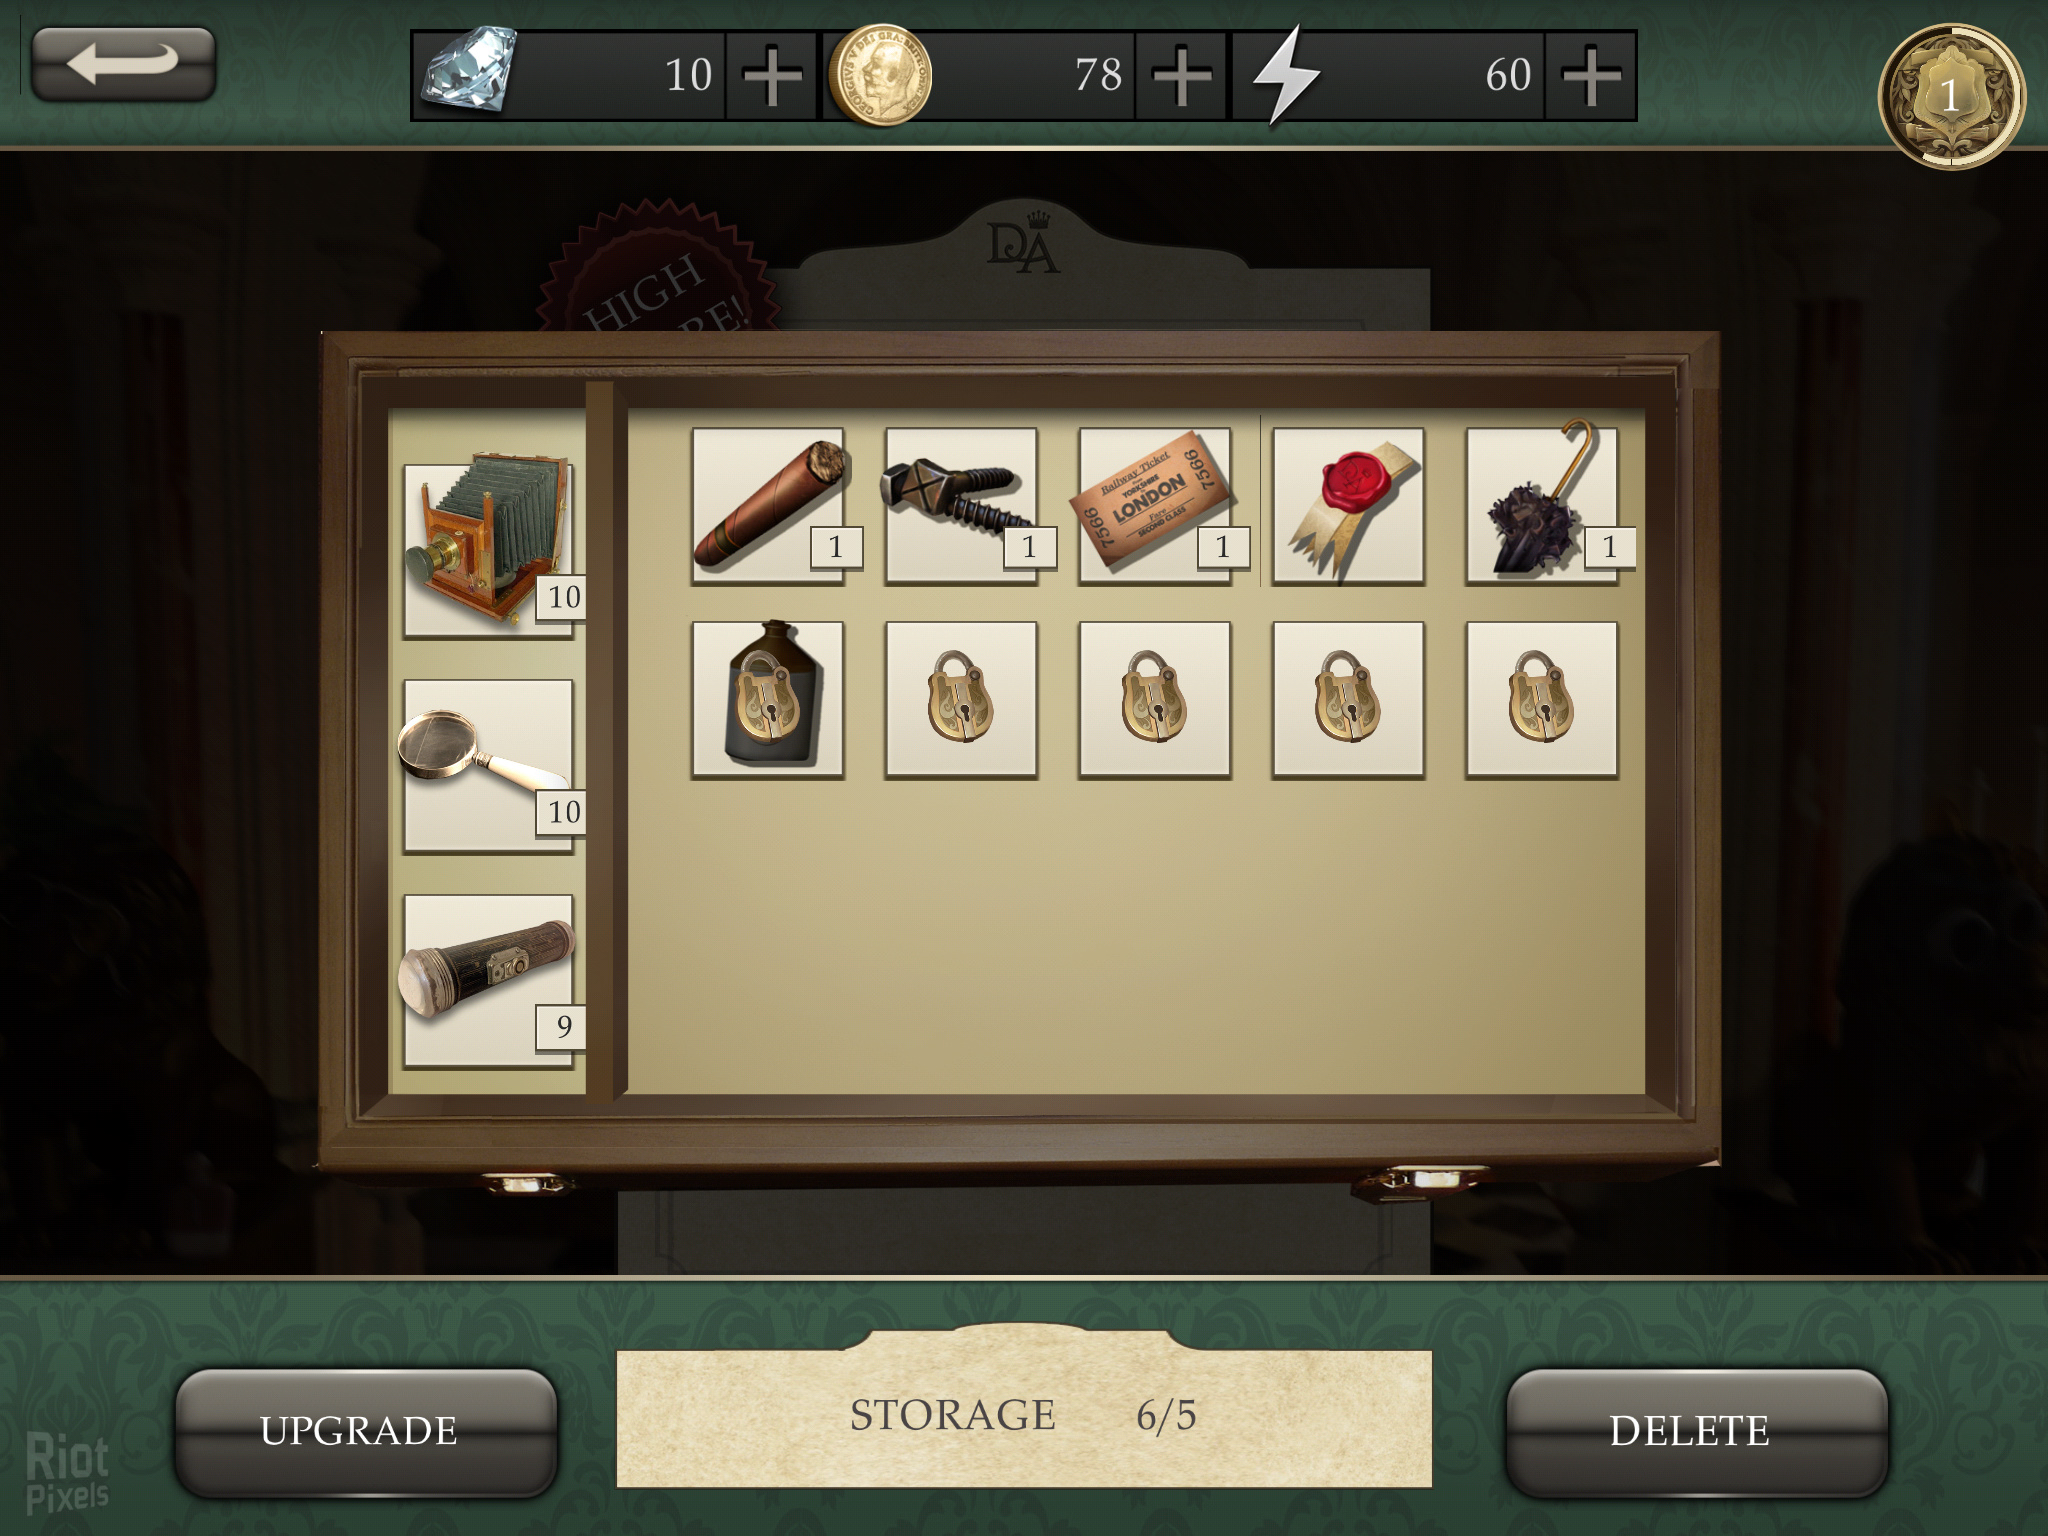 Downton Abbey: Mysteries of the Manor - game screenshots at Riot 